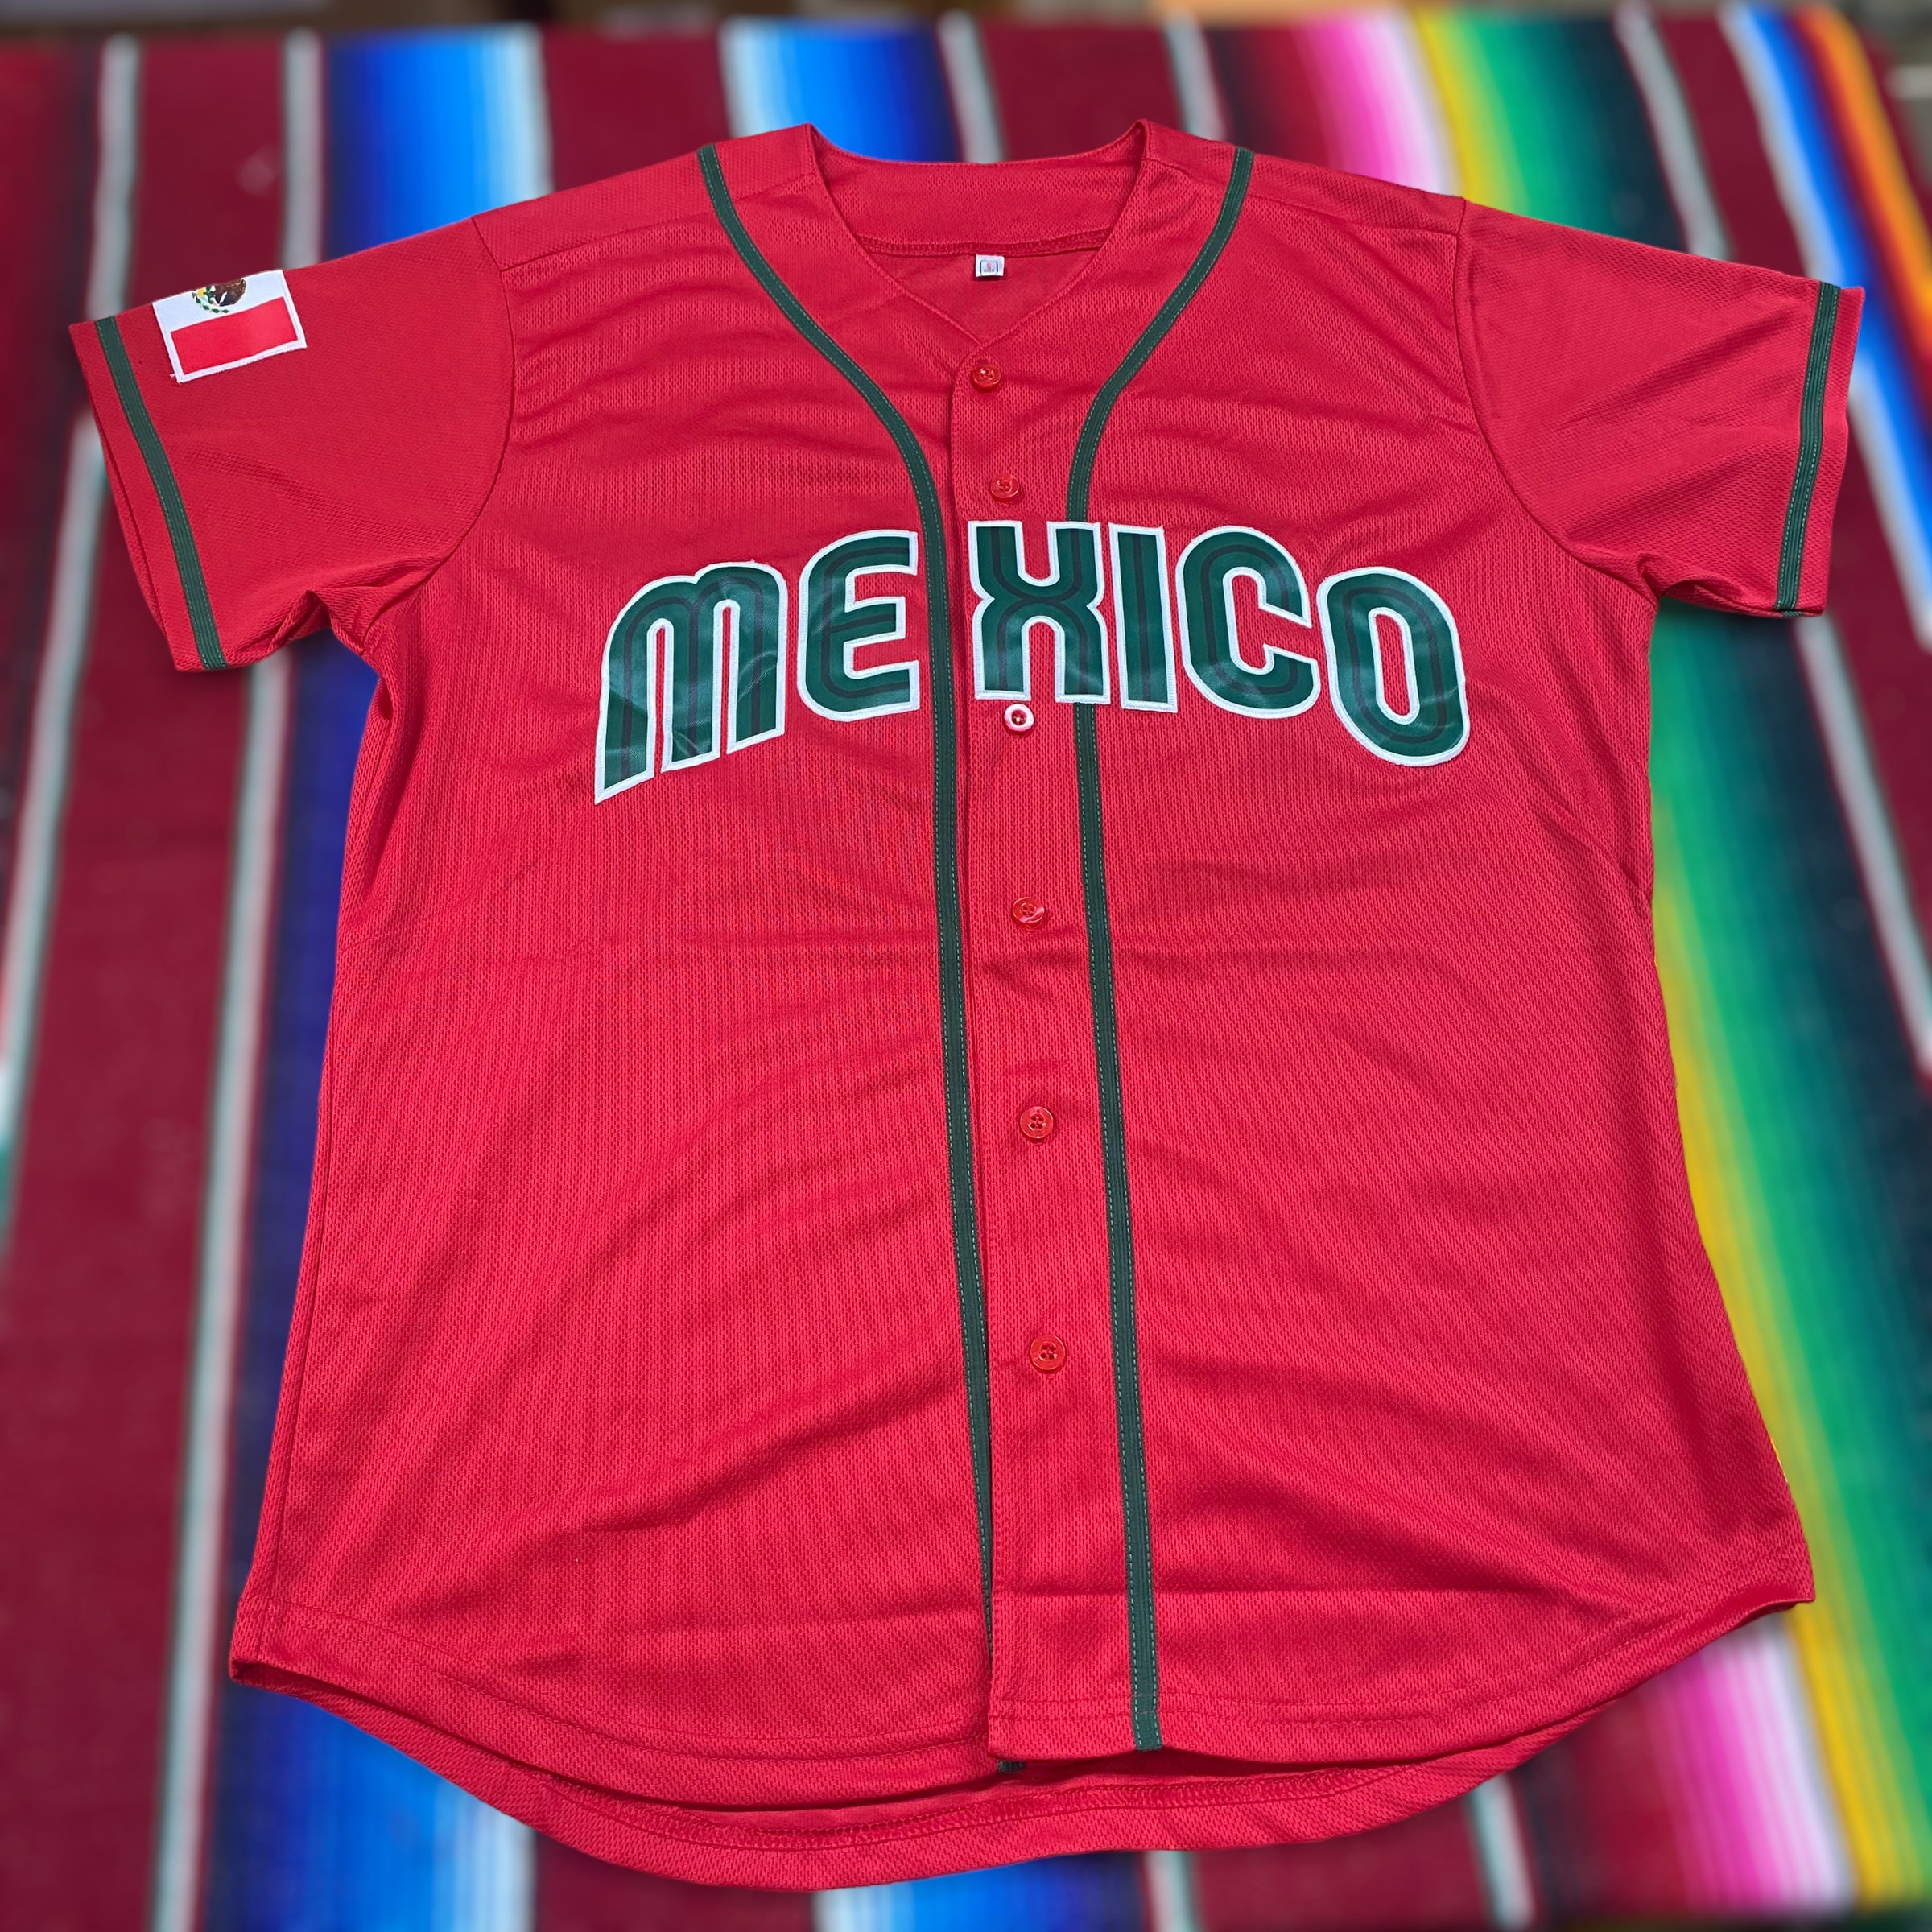  Personalized Mexico Mexican Baseball Shirt,Customized Team Name  Mexican Aztec Baseball Jersey for Men for Men,Women S-5XL : Sports &  Outdoors